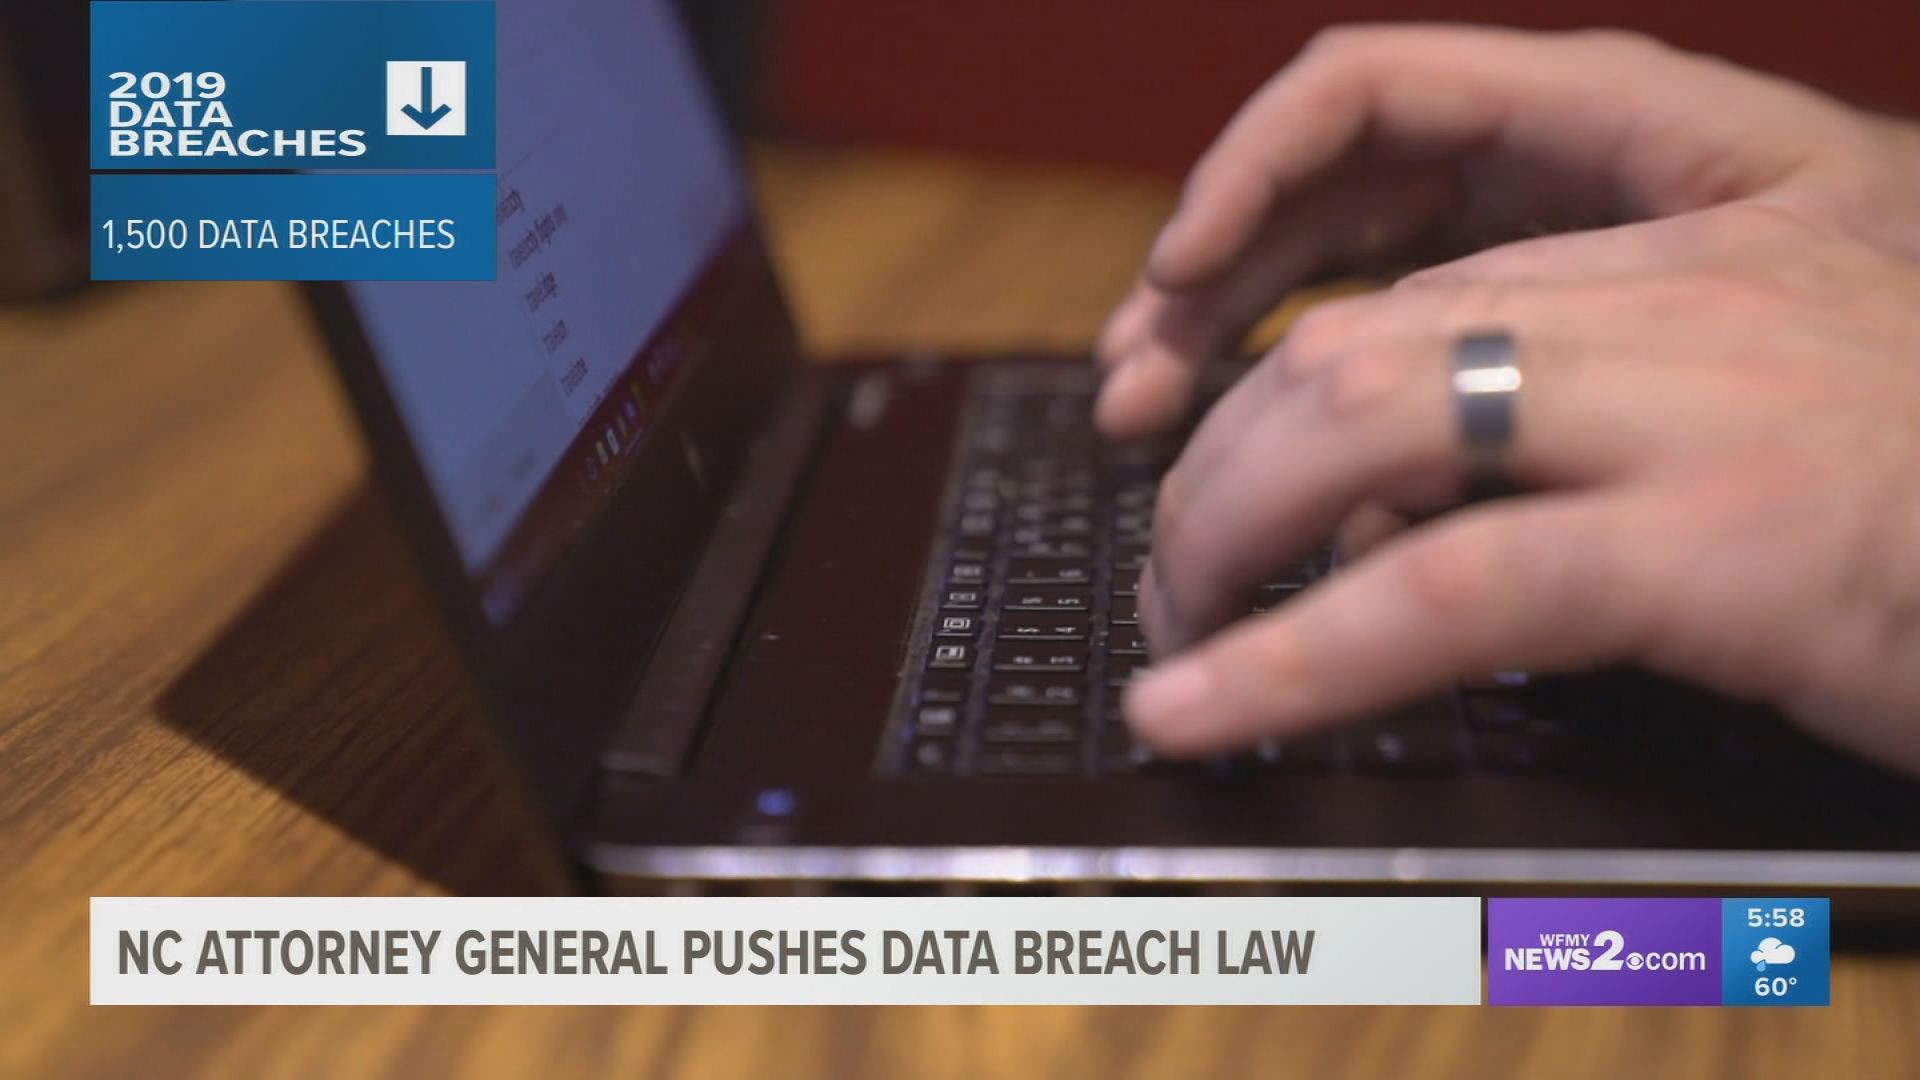 The law could help stem the damage from data breaches quickly.